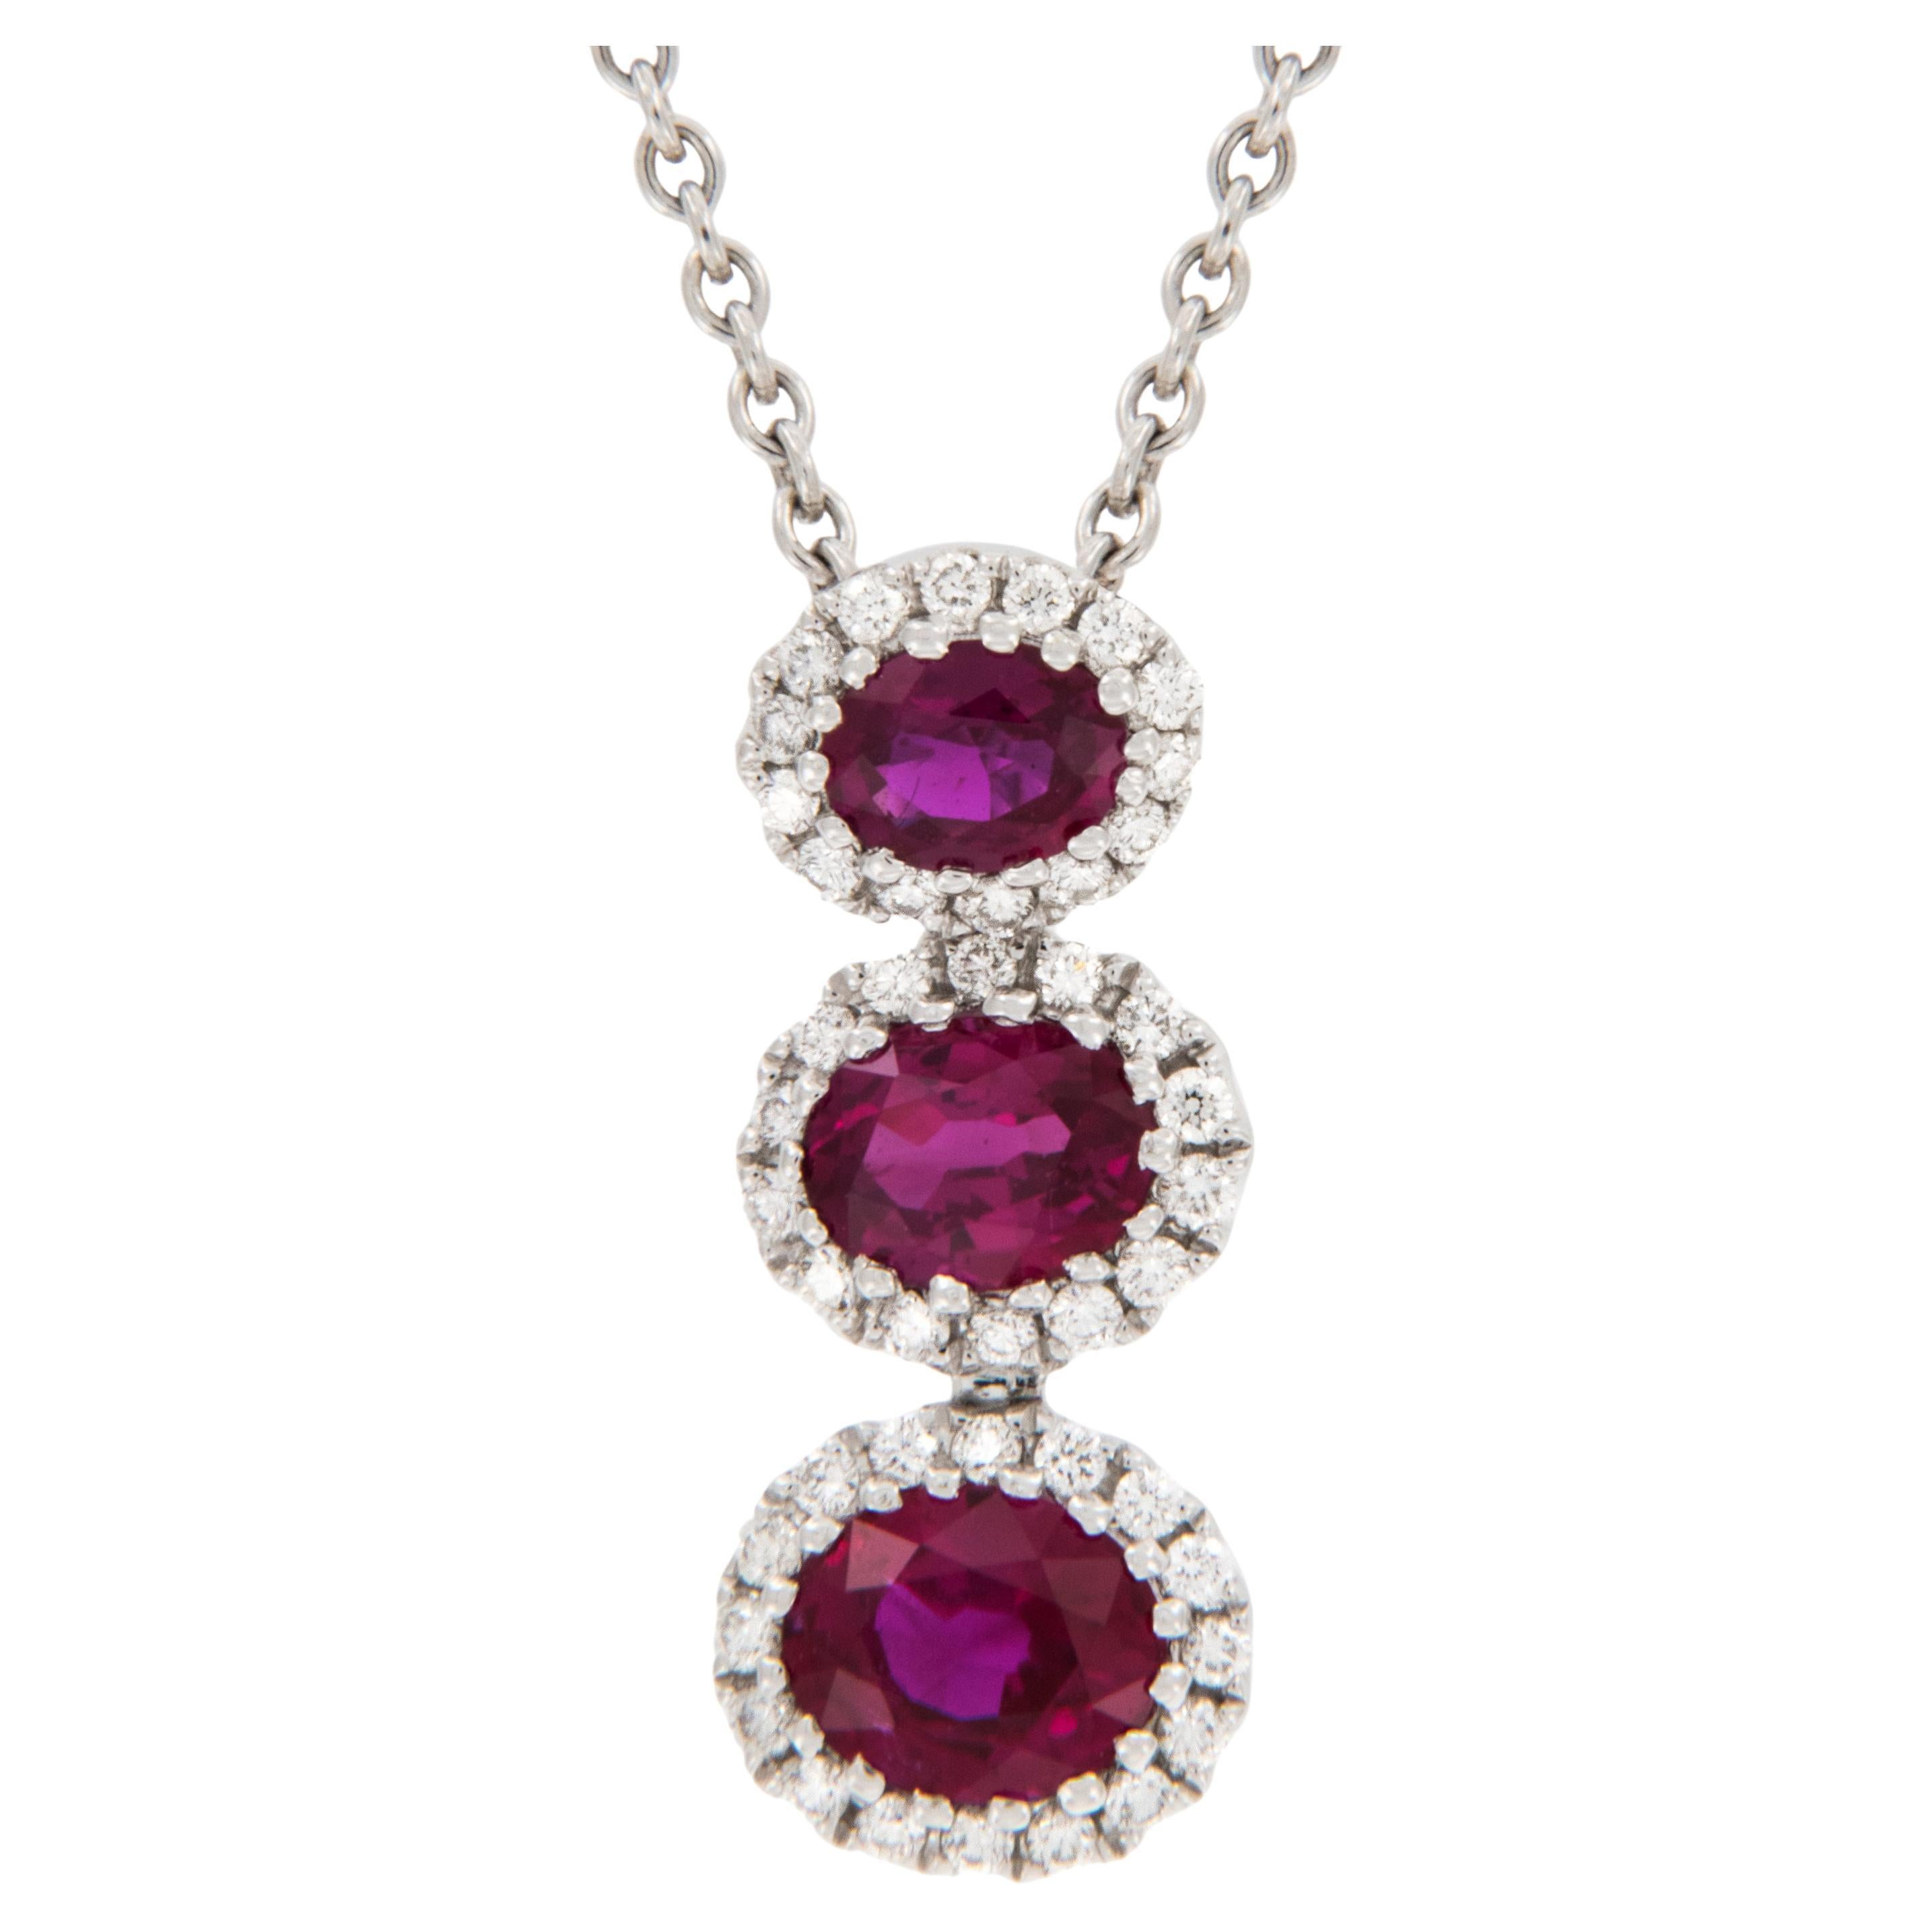 18 Karat White Gold 1.08 Cttw Ruby and Diamond Necklace by Spark Creations